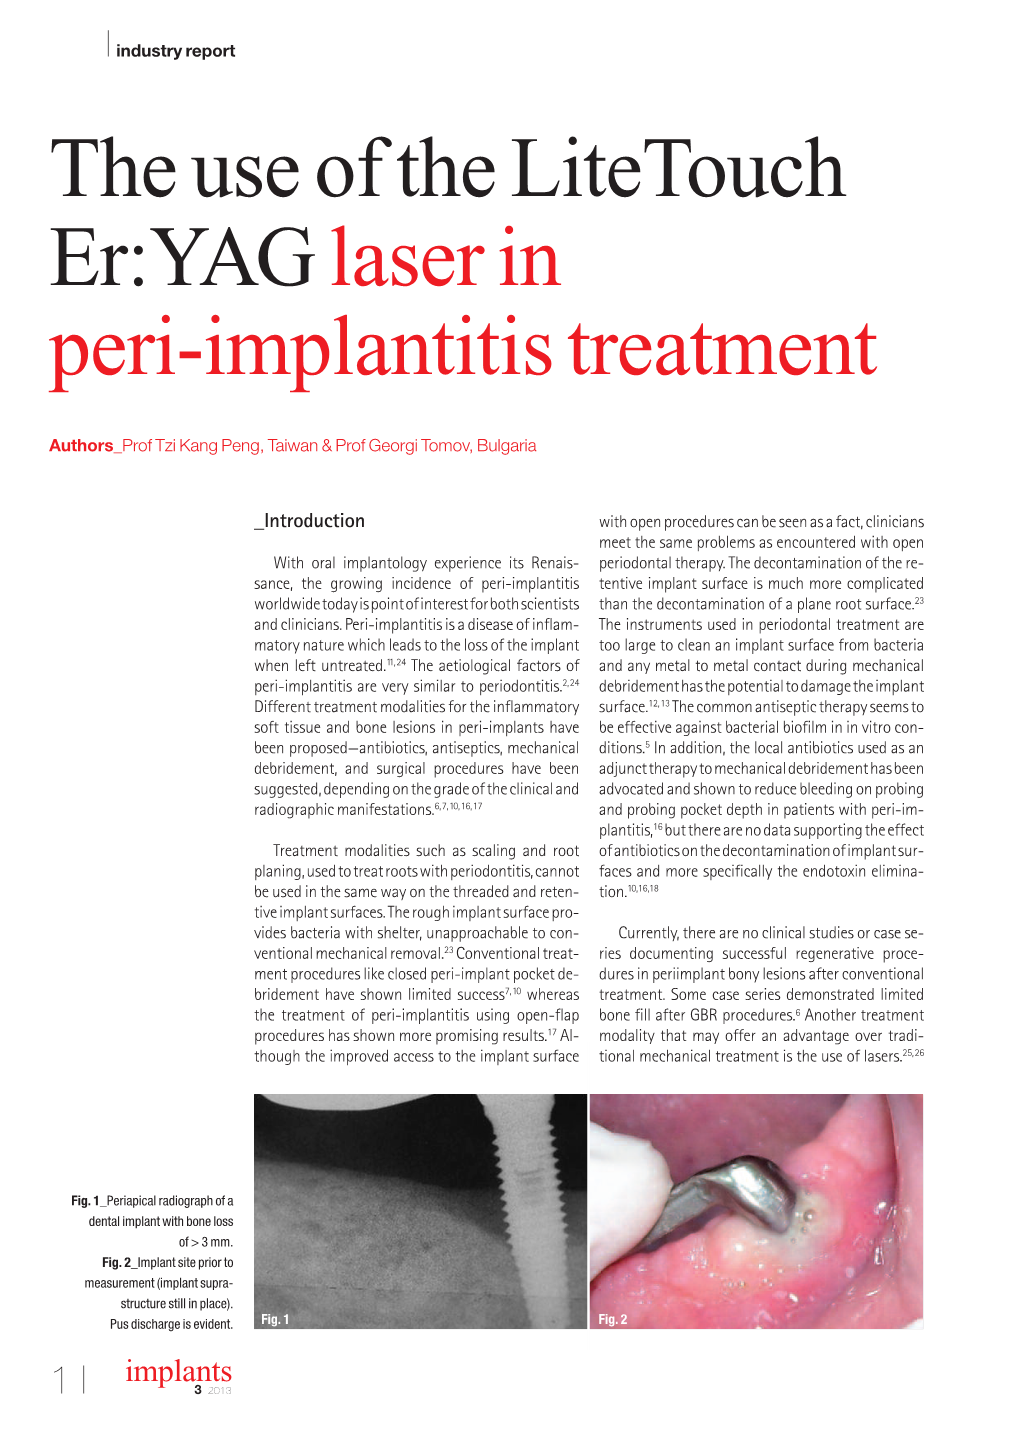 The Use of the Litetouch Er:YAG Laser in Peri-Implantitis Treatment